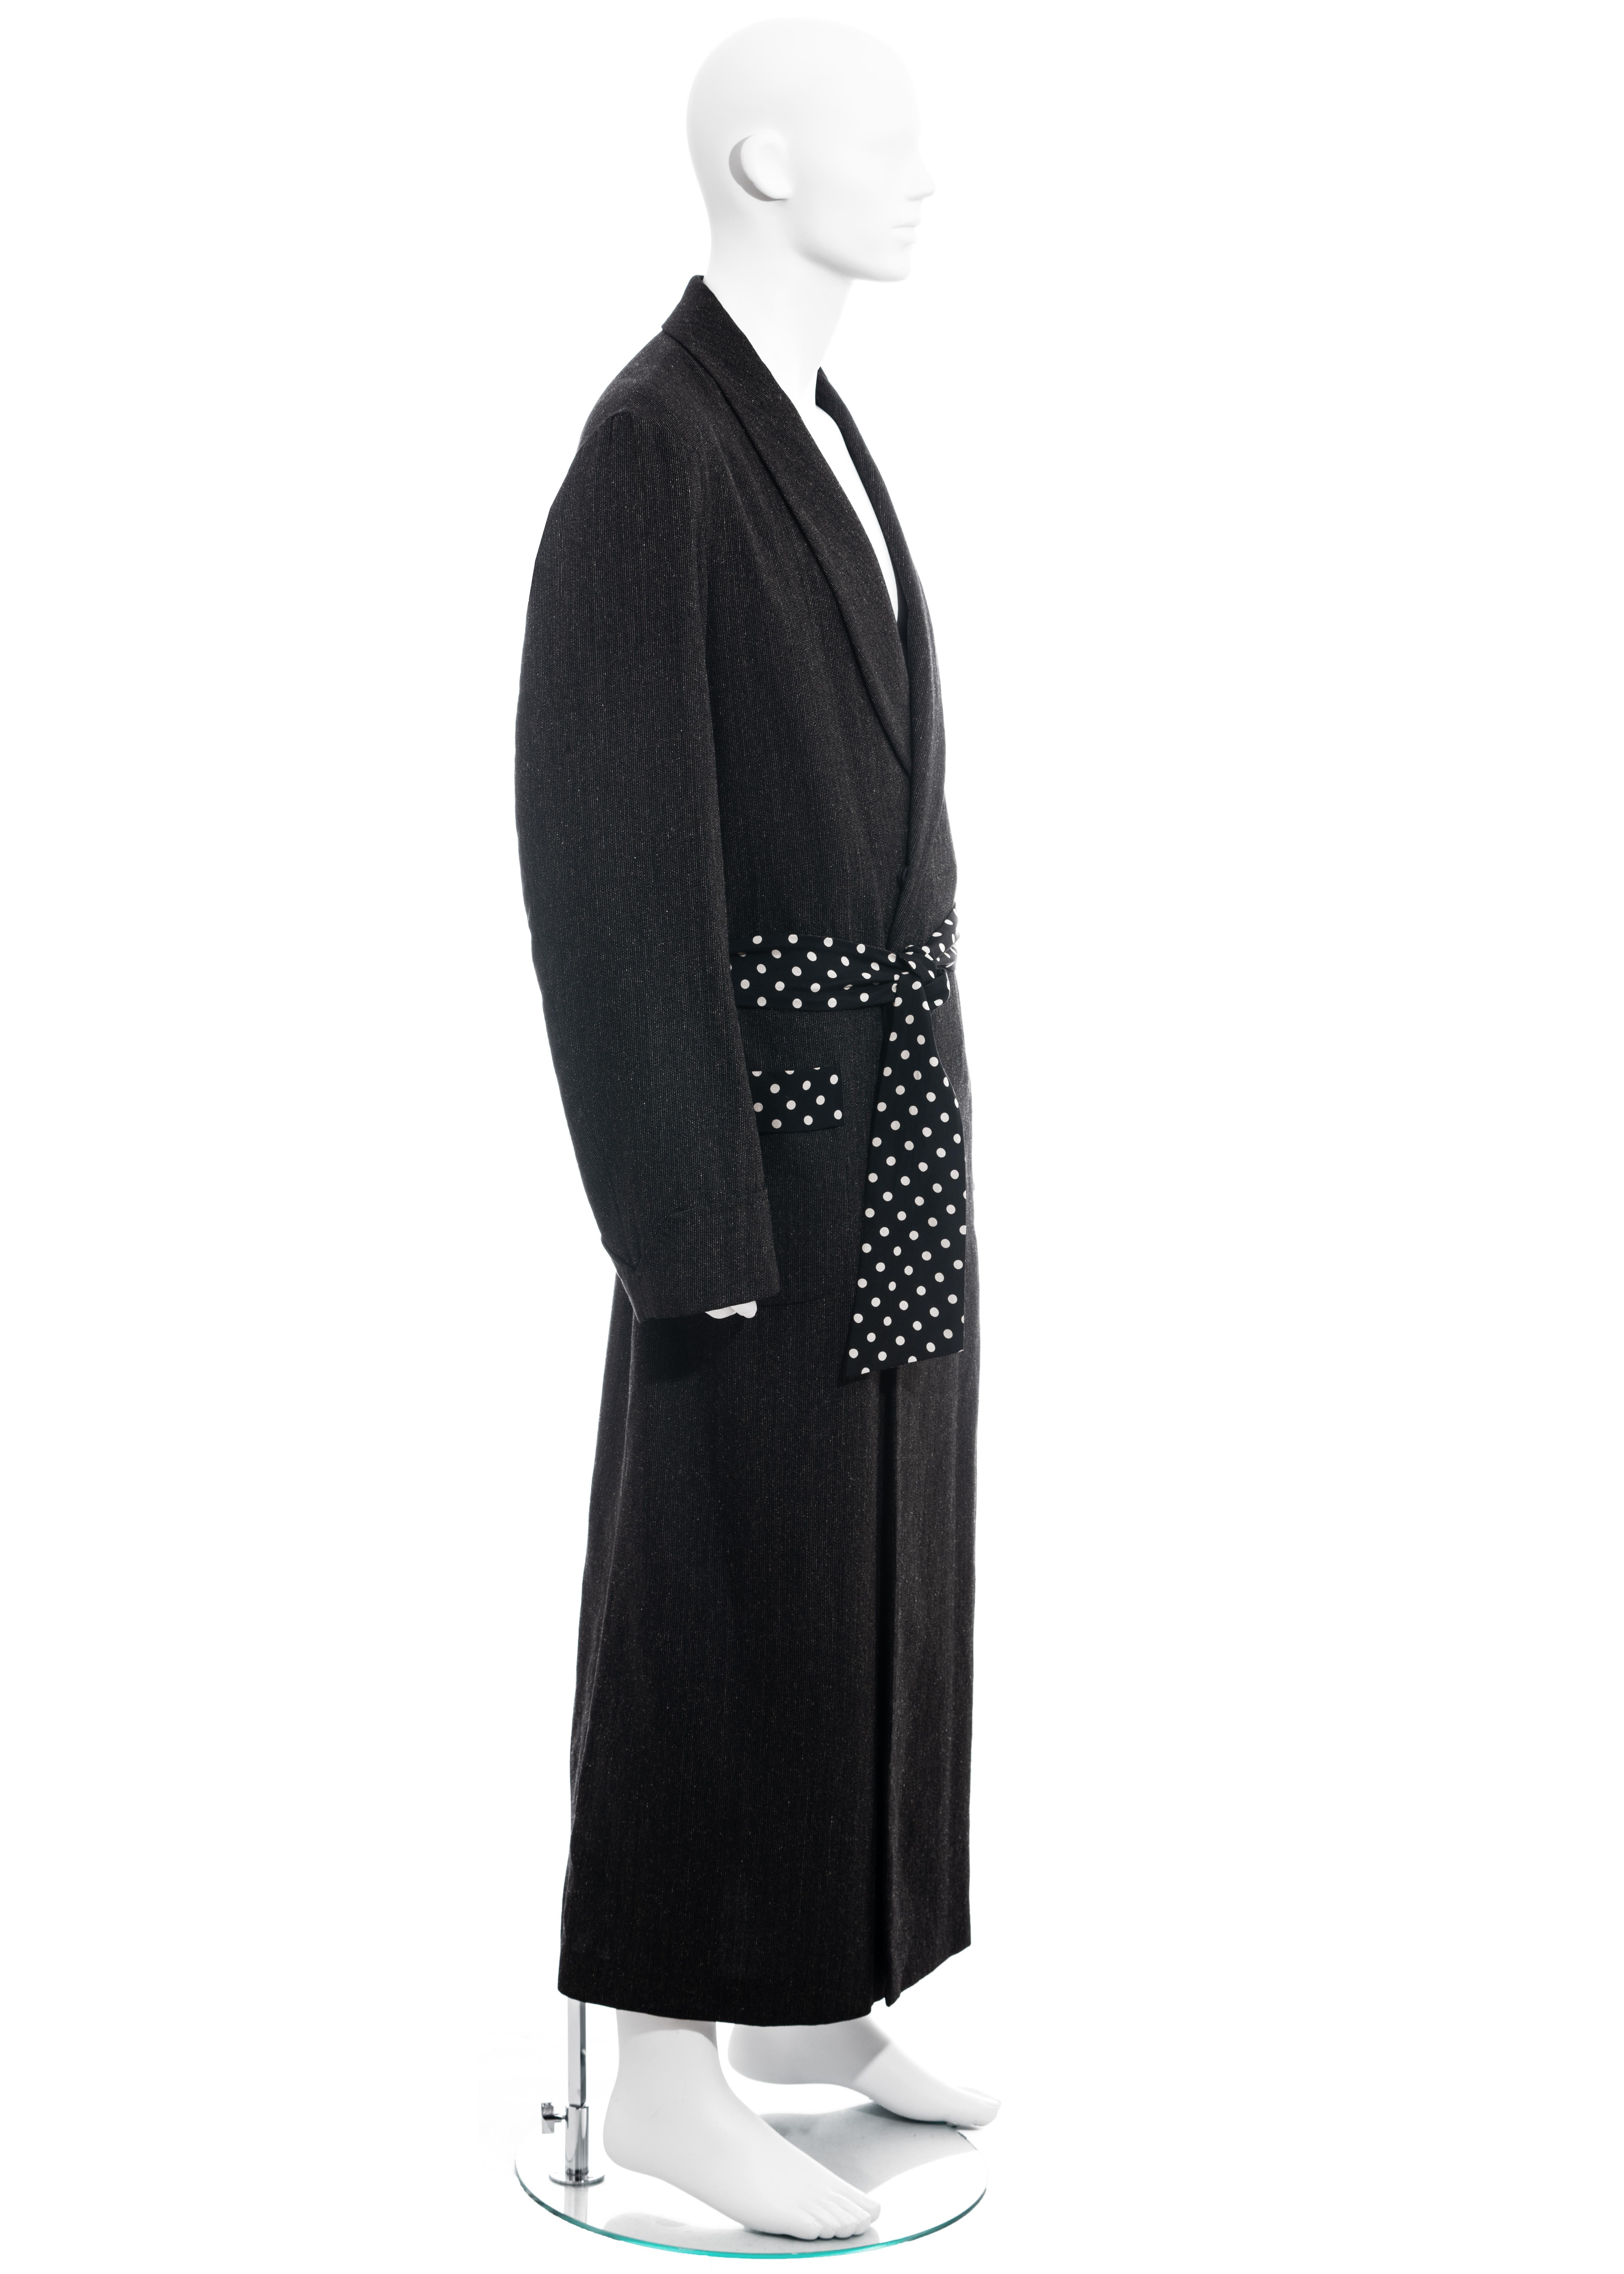 Men's Yohji Yamamoto grey wool and silk polkadot evening robe, fw 2009 In Excellent Condition For Sale In London, GB